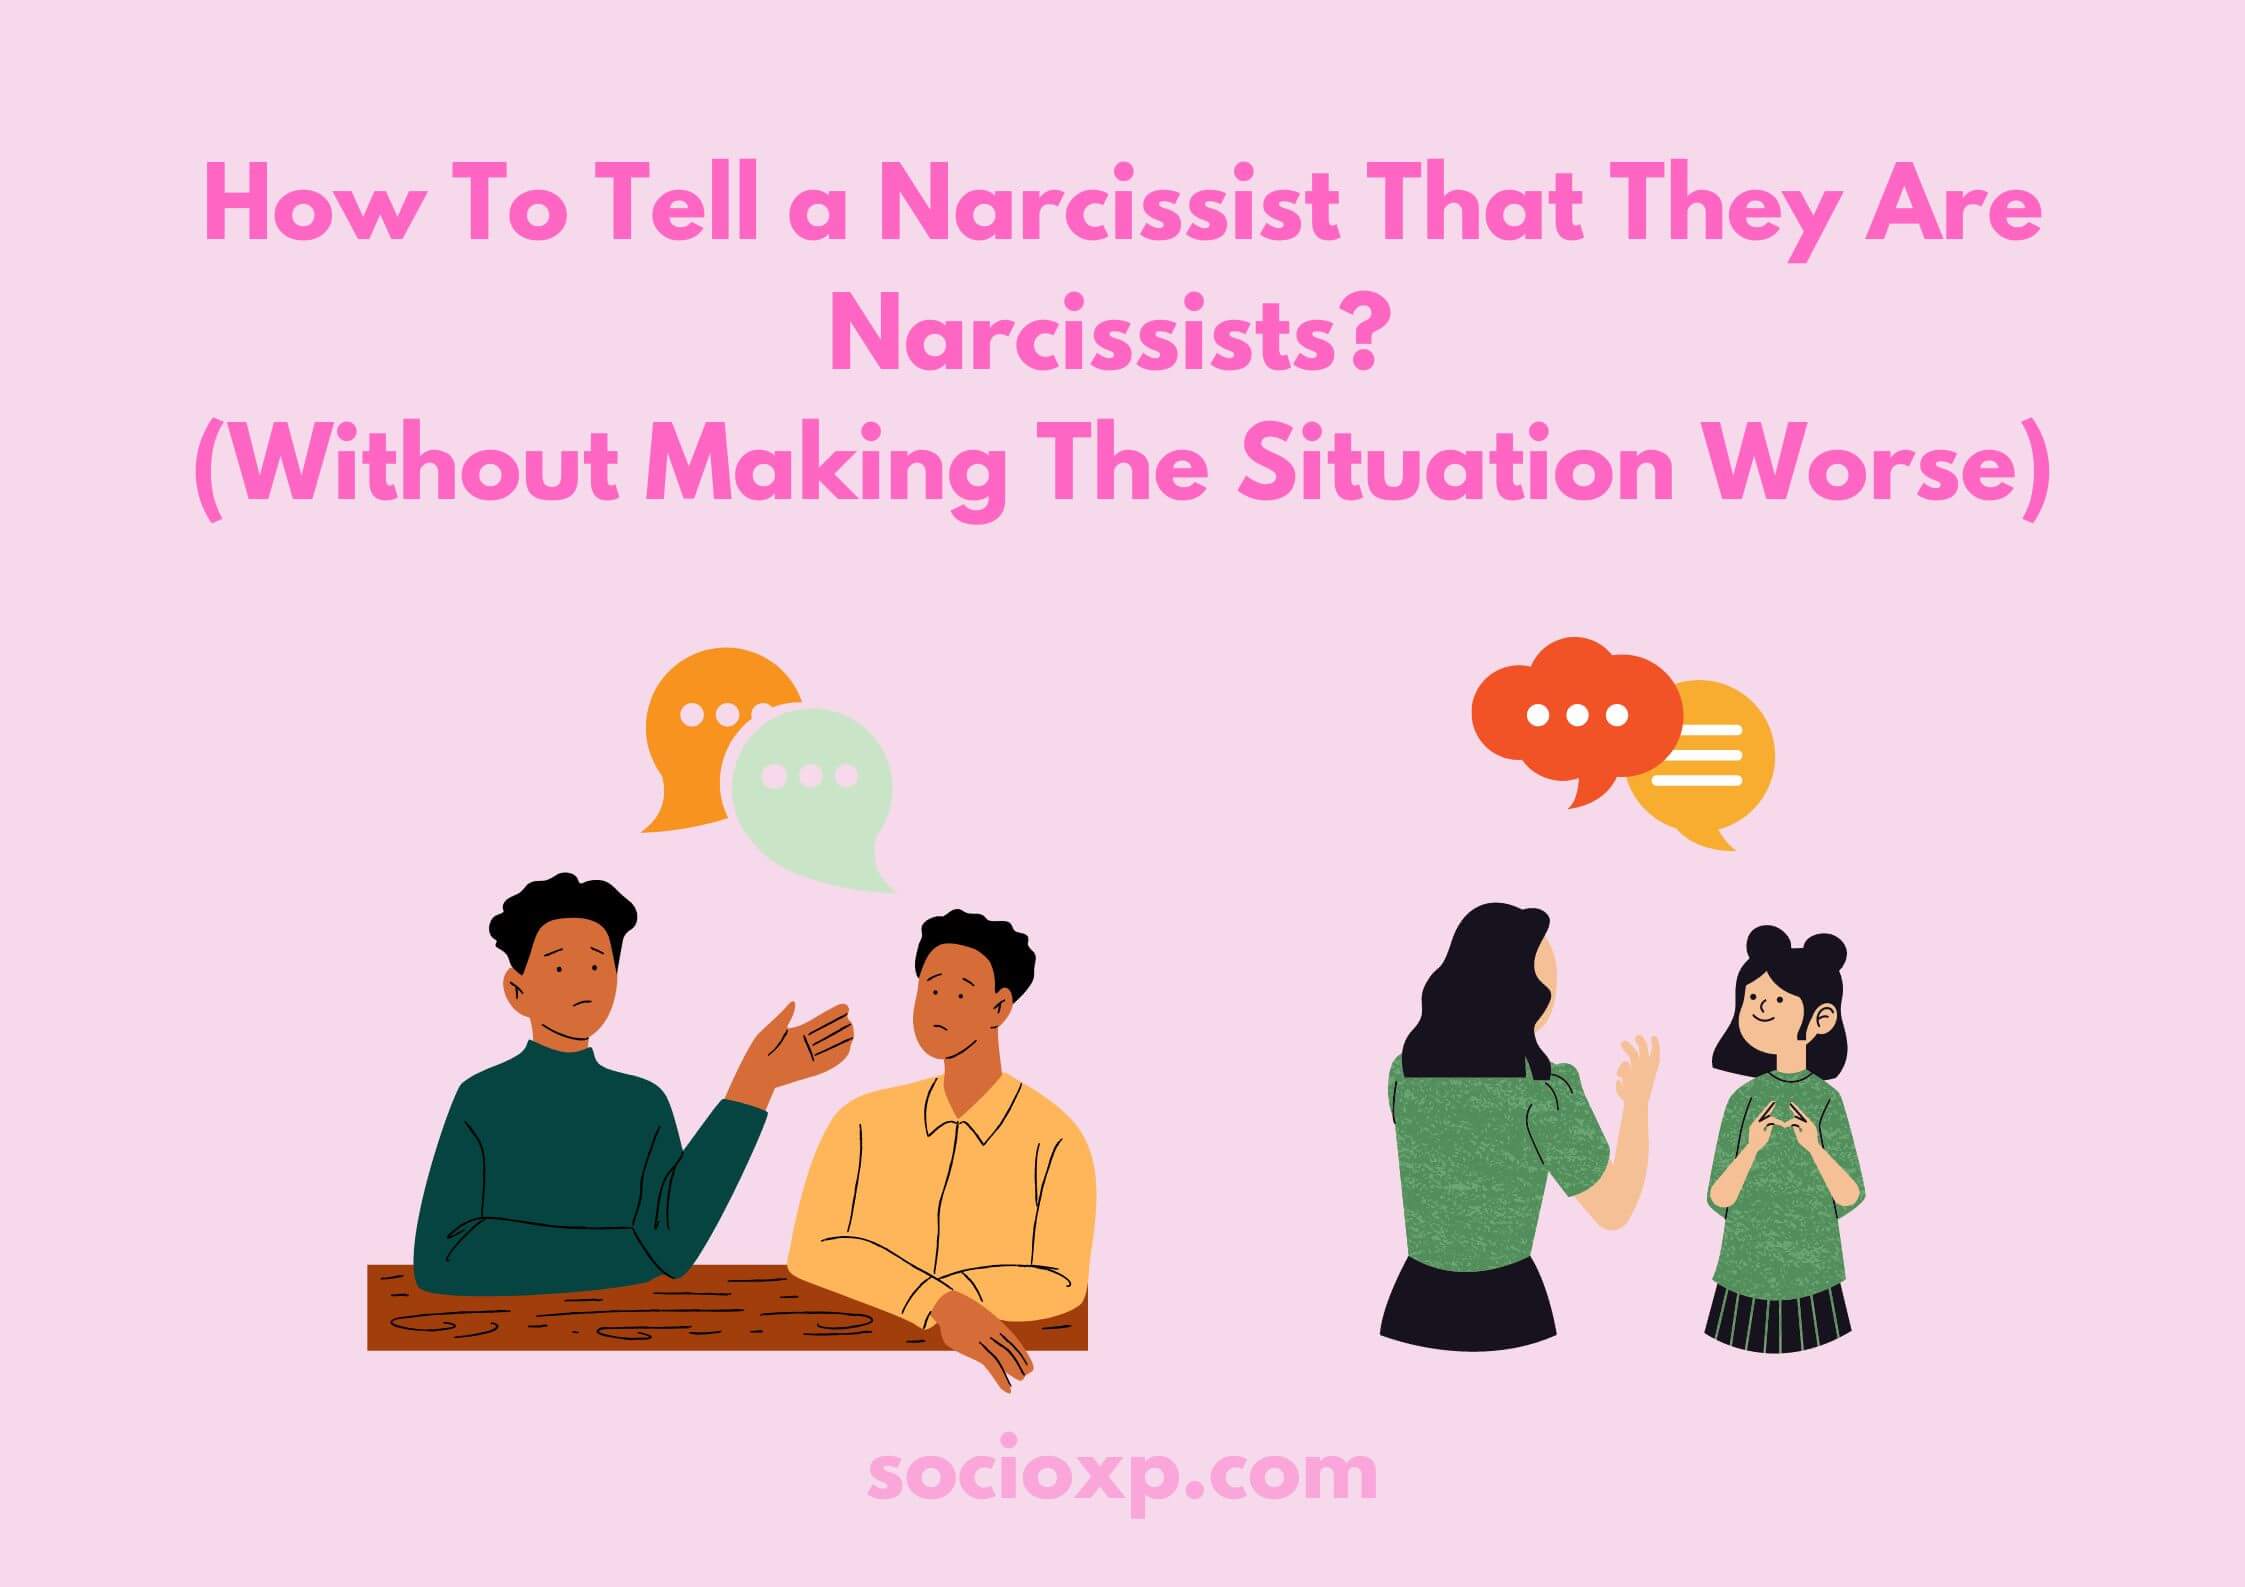 How To Tell A Narcissist That They Are Narcissists? (Without Making The Situation Worse)